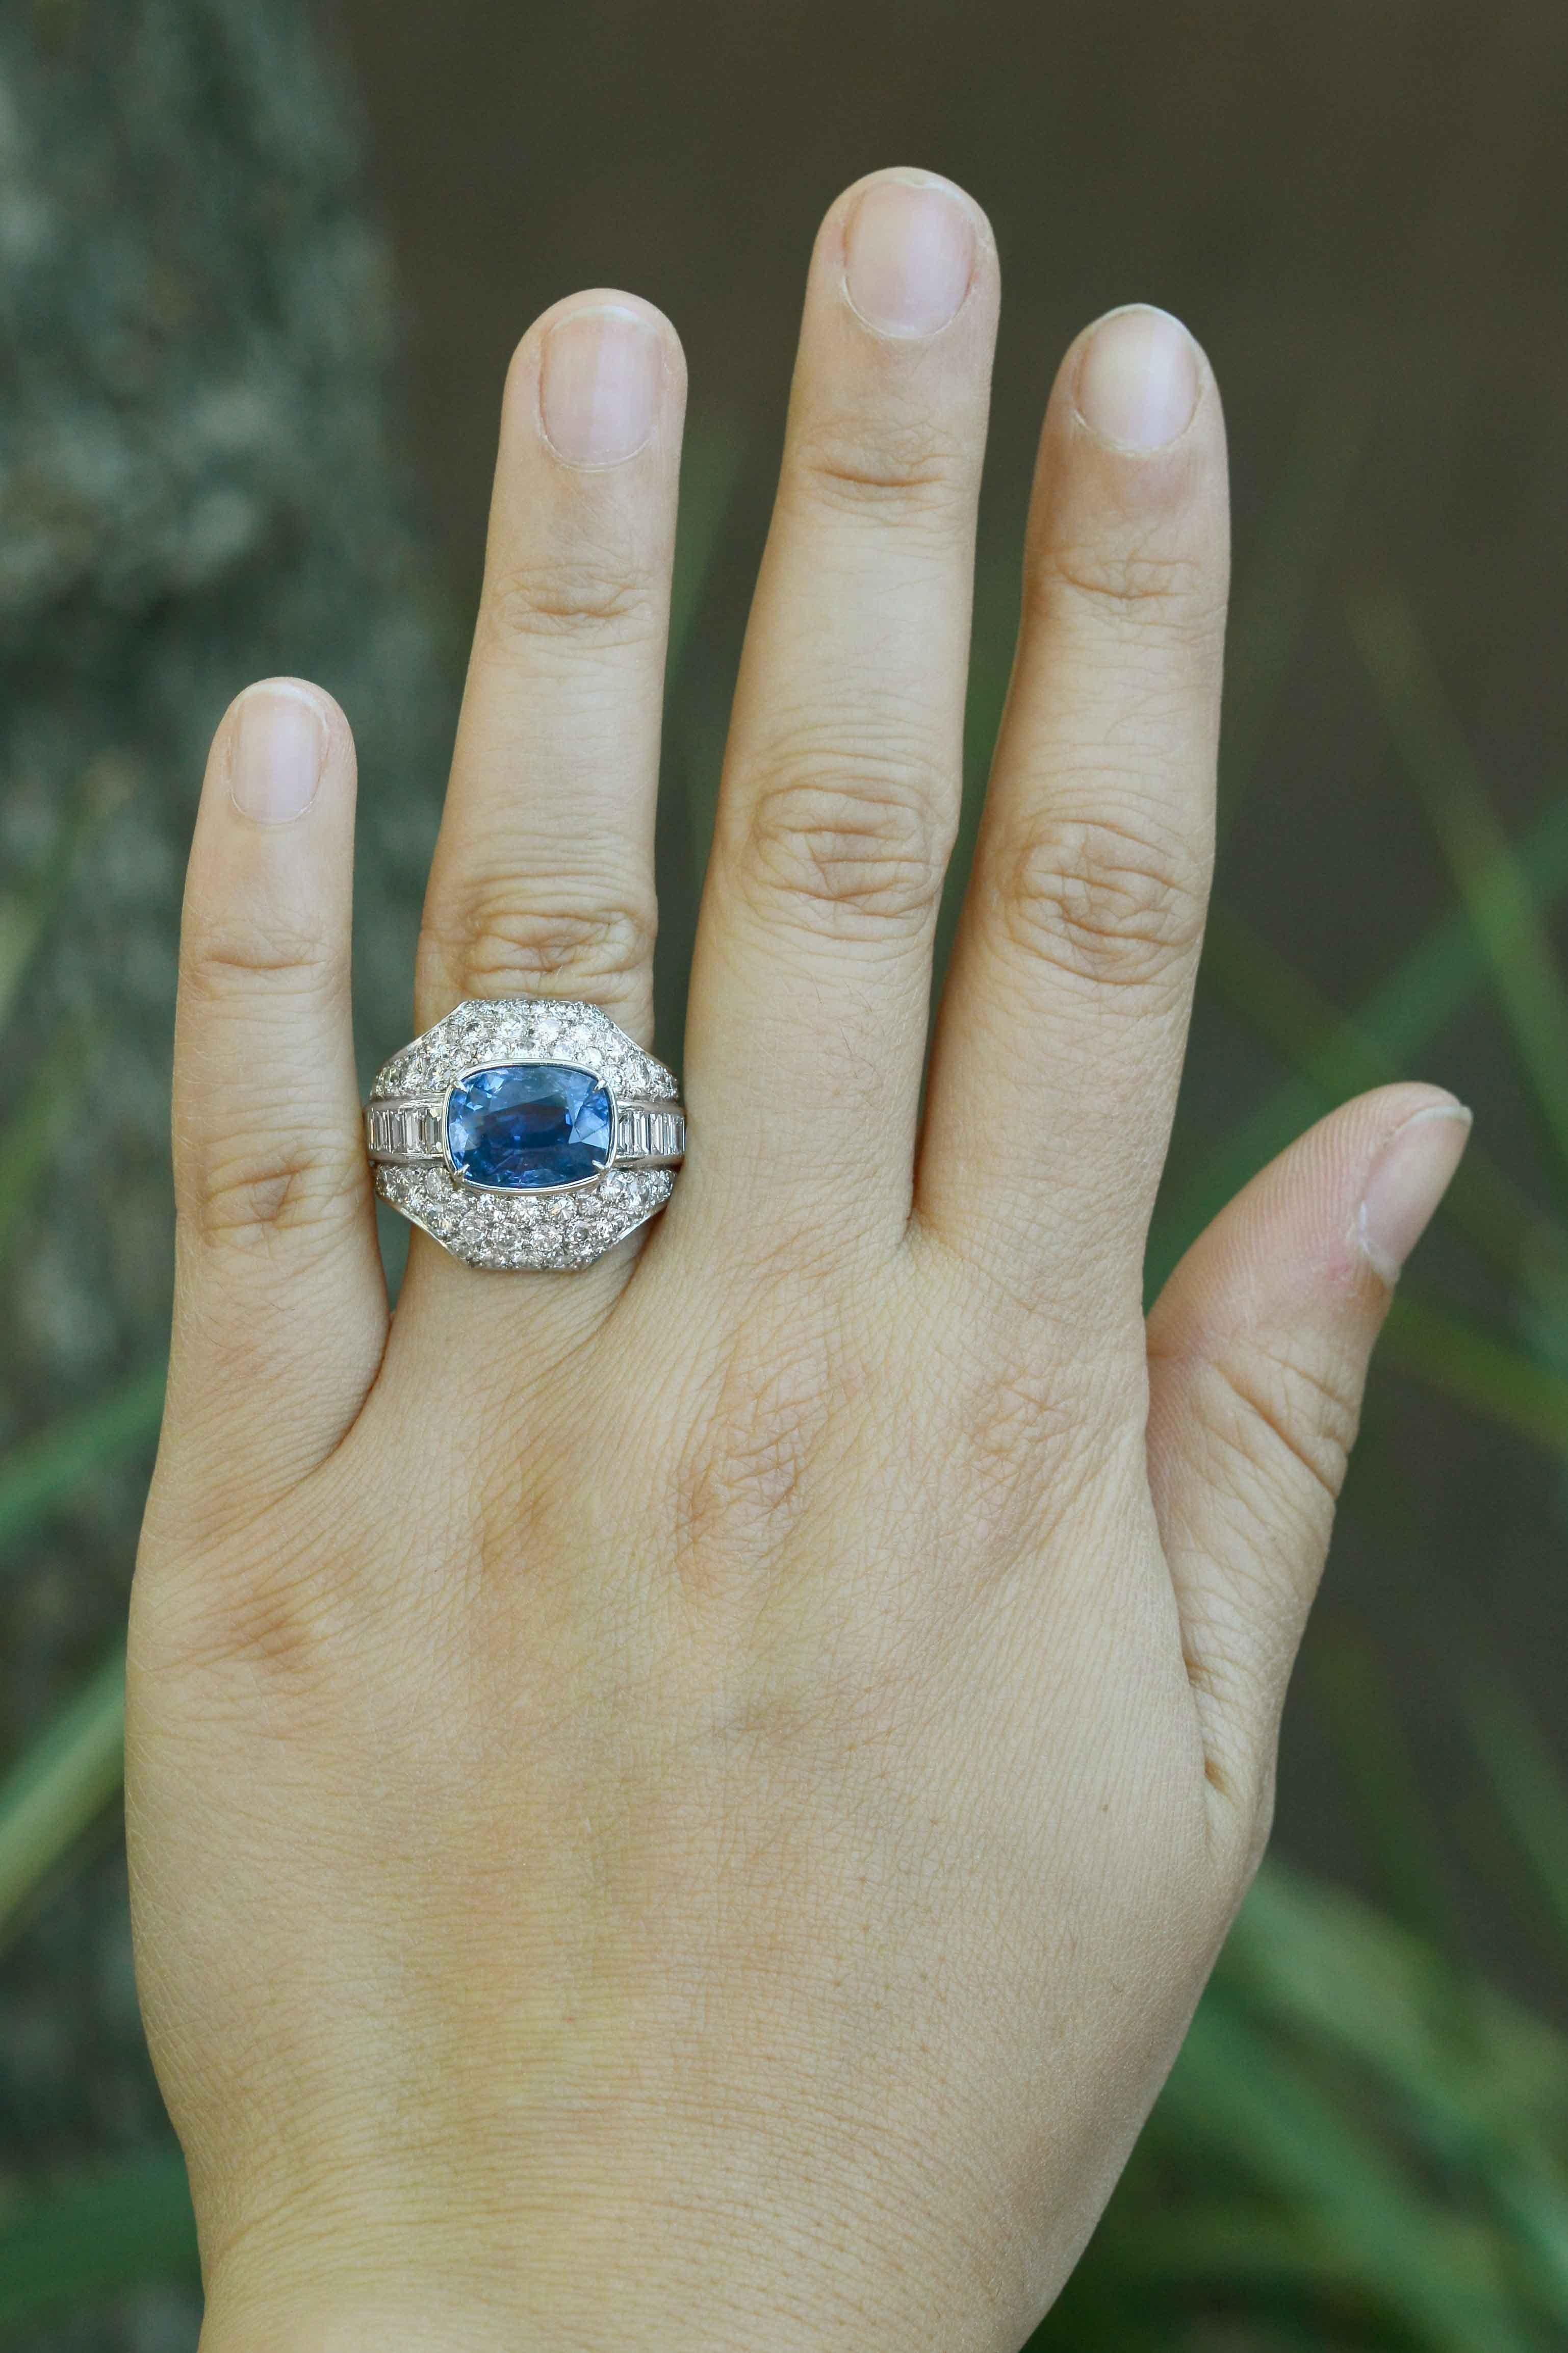 A stellar, no heated sapphire settled in a bed of glimmering diamonds. A gemstone this rare is unprecedented and highly coveted, especially one of this alluring, vivid color and saturation. The unique, bombe' dome cocktail ring setting provides an